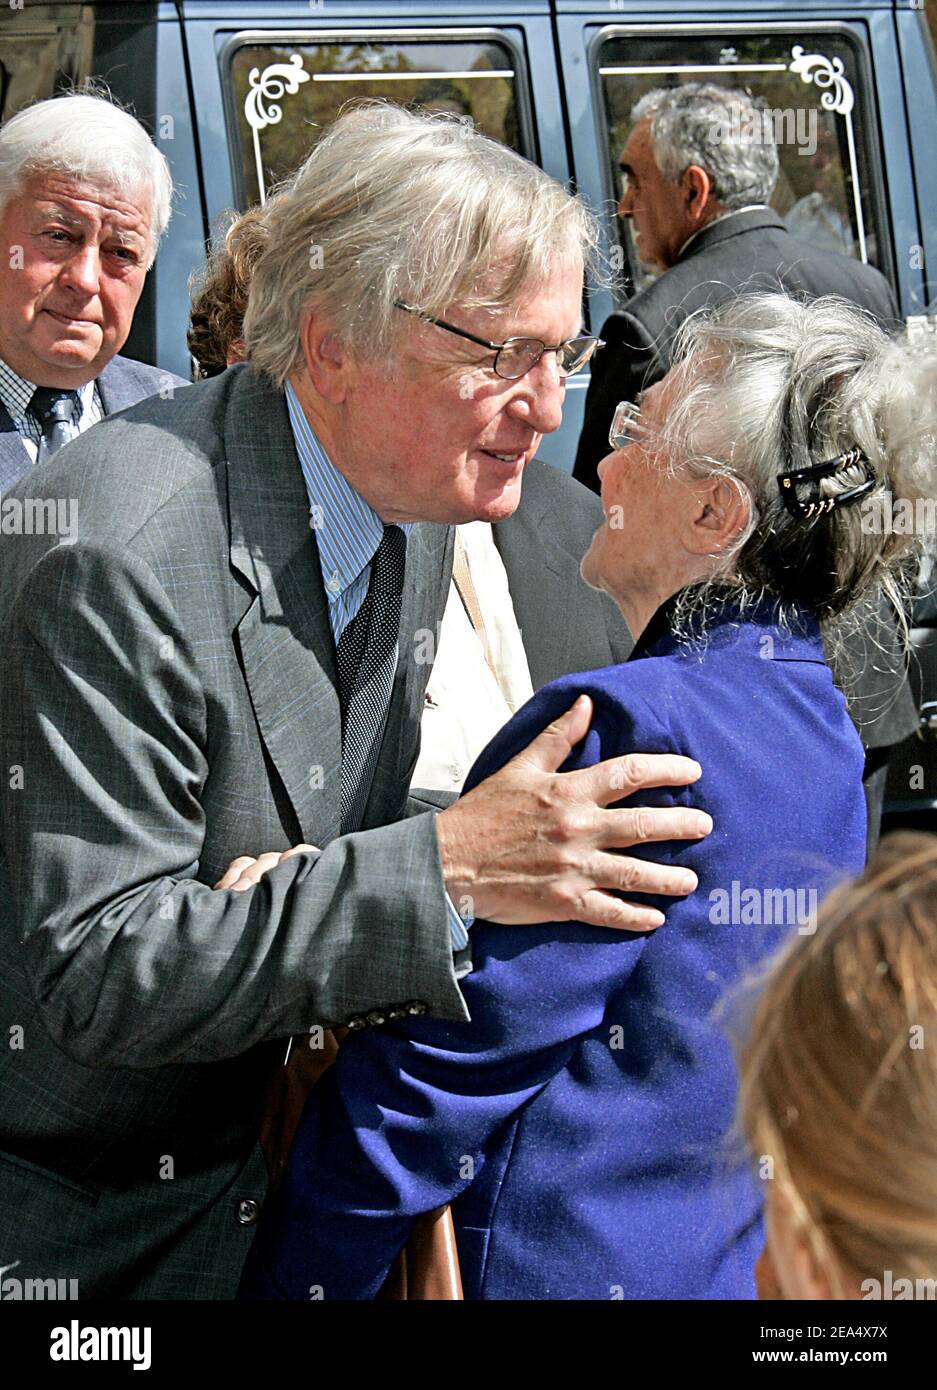 French actor Claude Rich hugs Colette Dufilho at the funeral of the late French actor Jacques Dufilho held at the cathedral of Mirande, southwestern France, on August 31, 2005. Dufilho died on August 28 aged 91. Photo by Patrick Bernard/ABACAPRESS.COM. Stock Photo